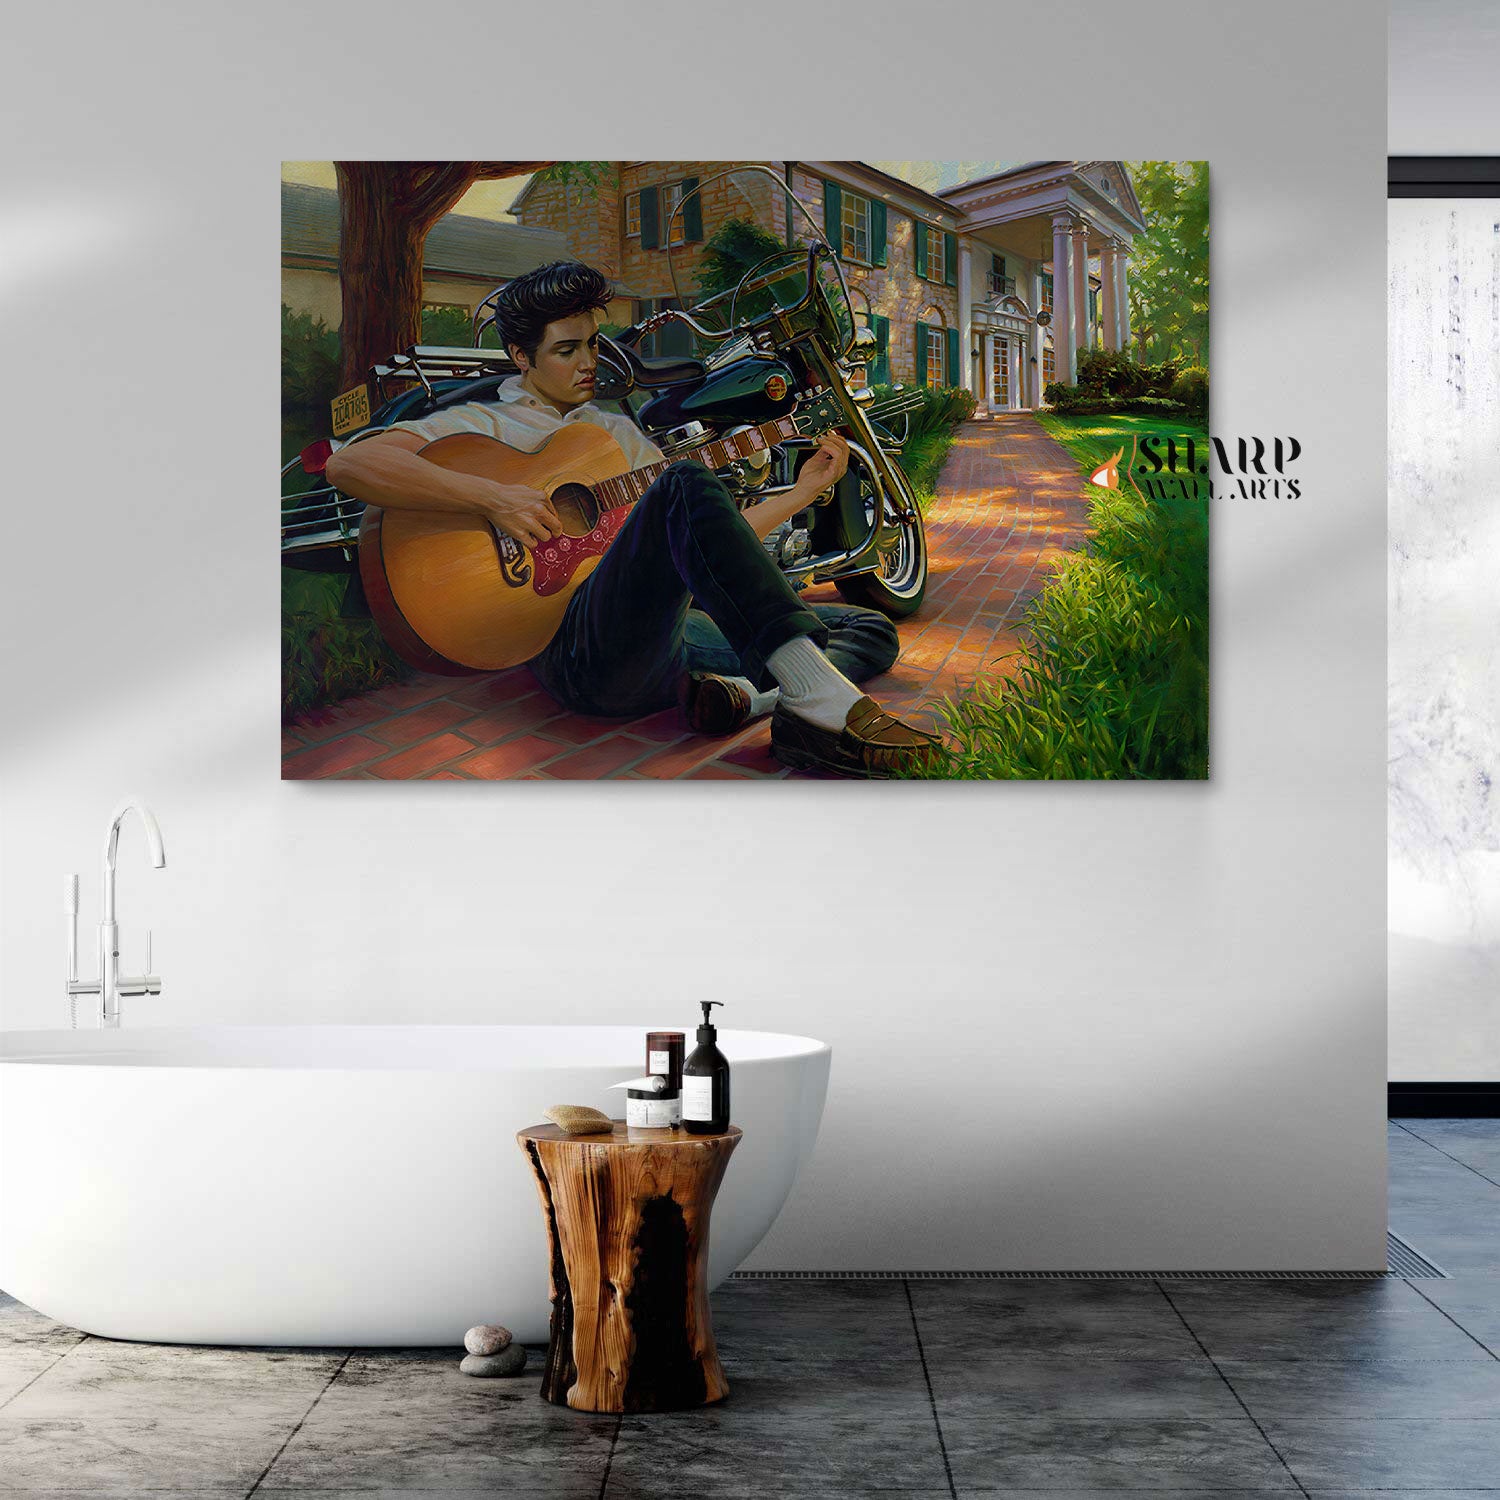 Elvis Presley Playing The Guitar Wall Art Canvas